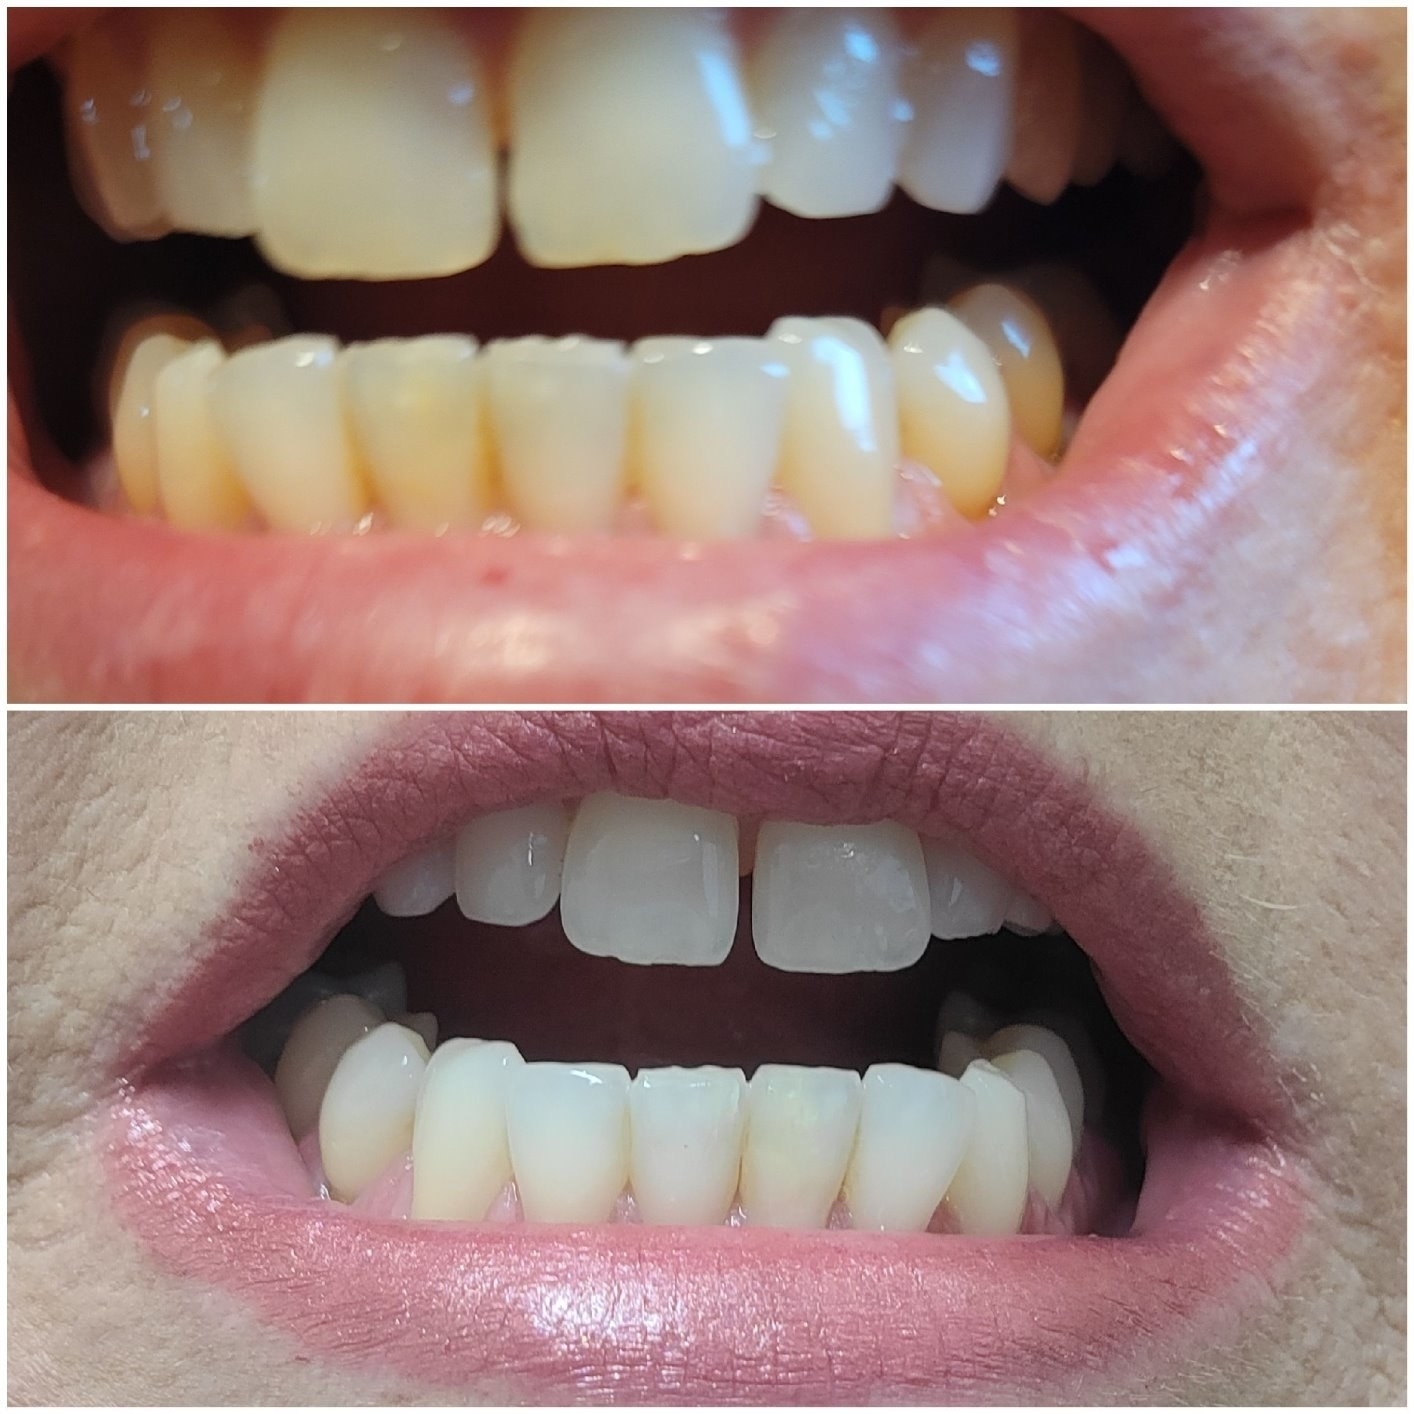 a reviewers teeth before, somewhat yellow, and after, definitely whiter